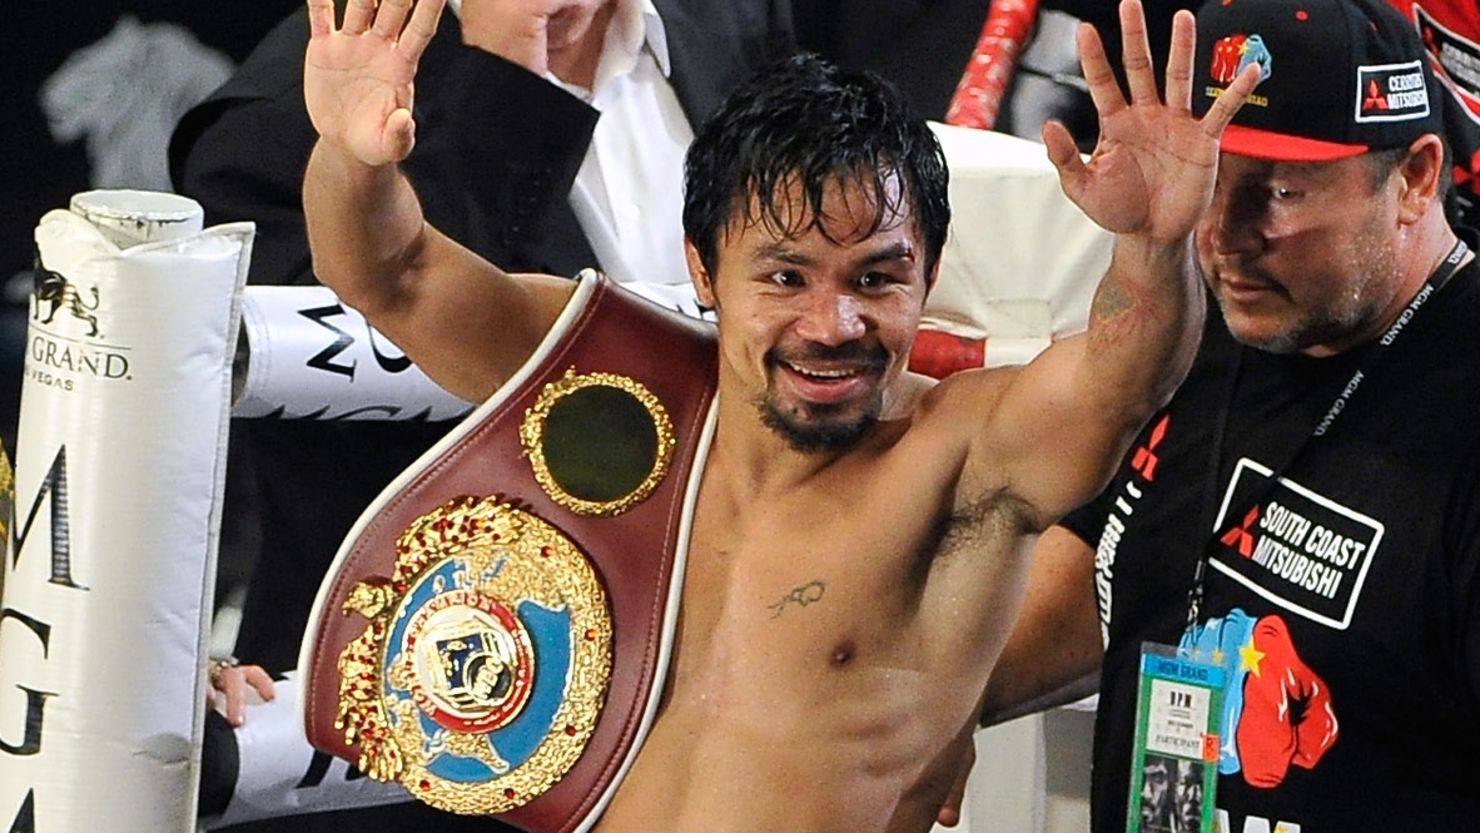 Manny Pacquiao celebrates his points victory over Timothy Bradley in Las Vegas in their world title bout.